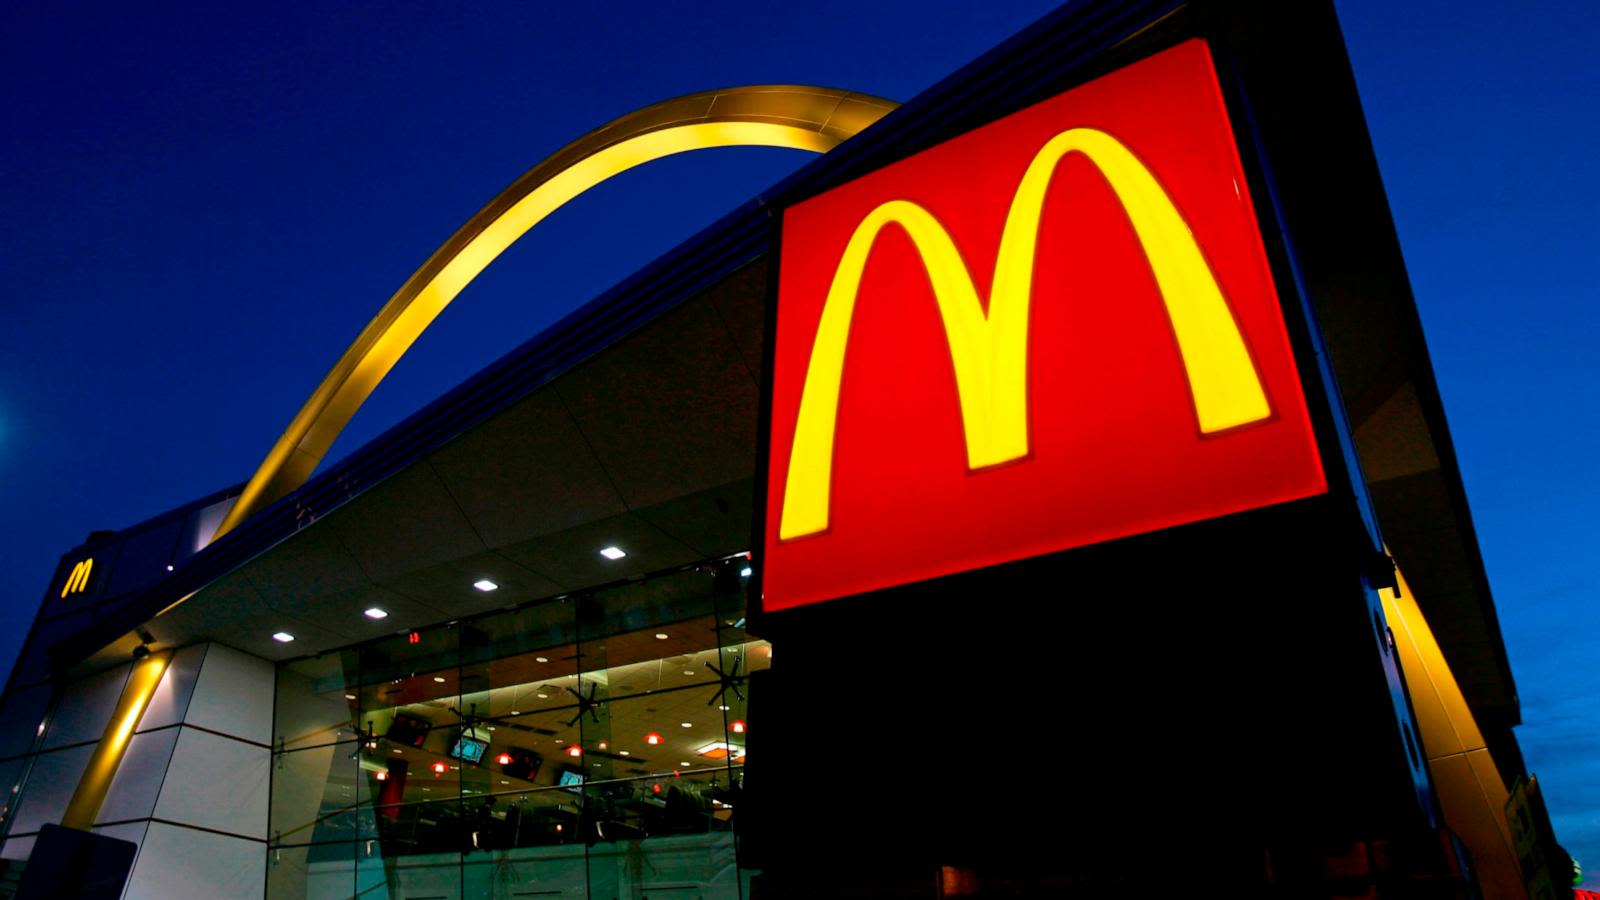 Target, McDonald's and Wendy's announce discounts. Has a price war broken out?